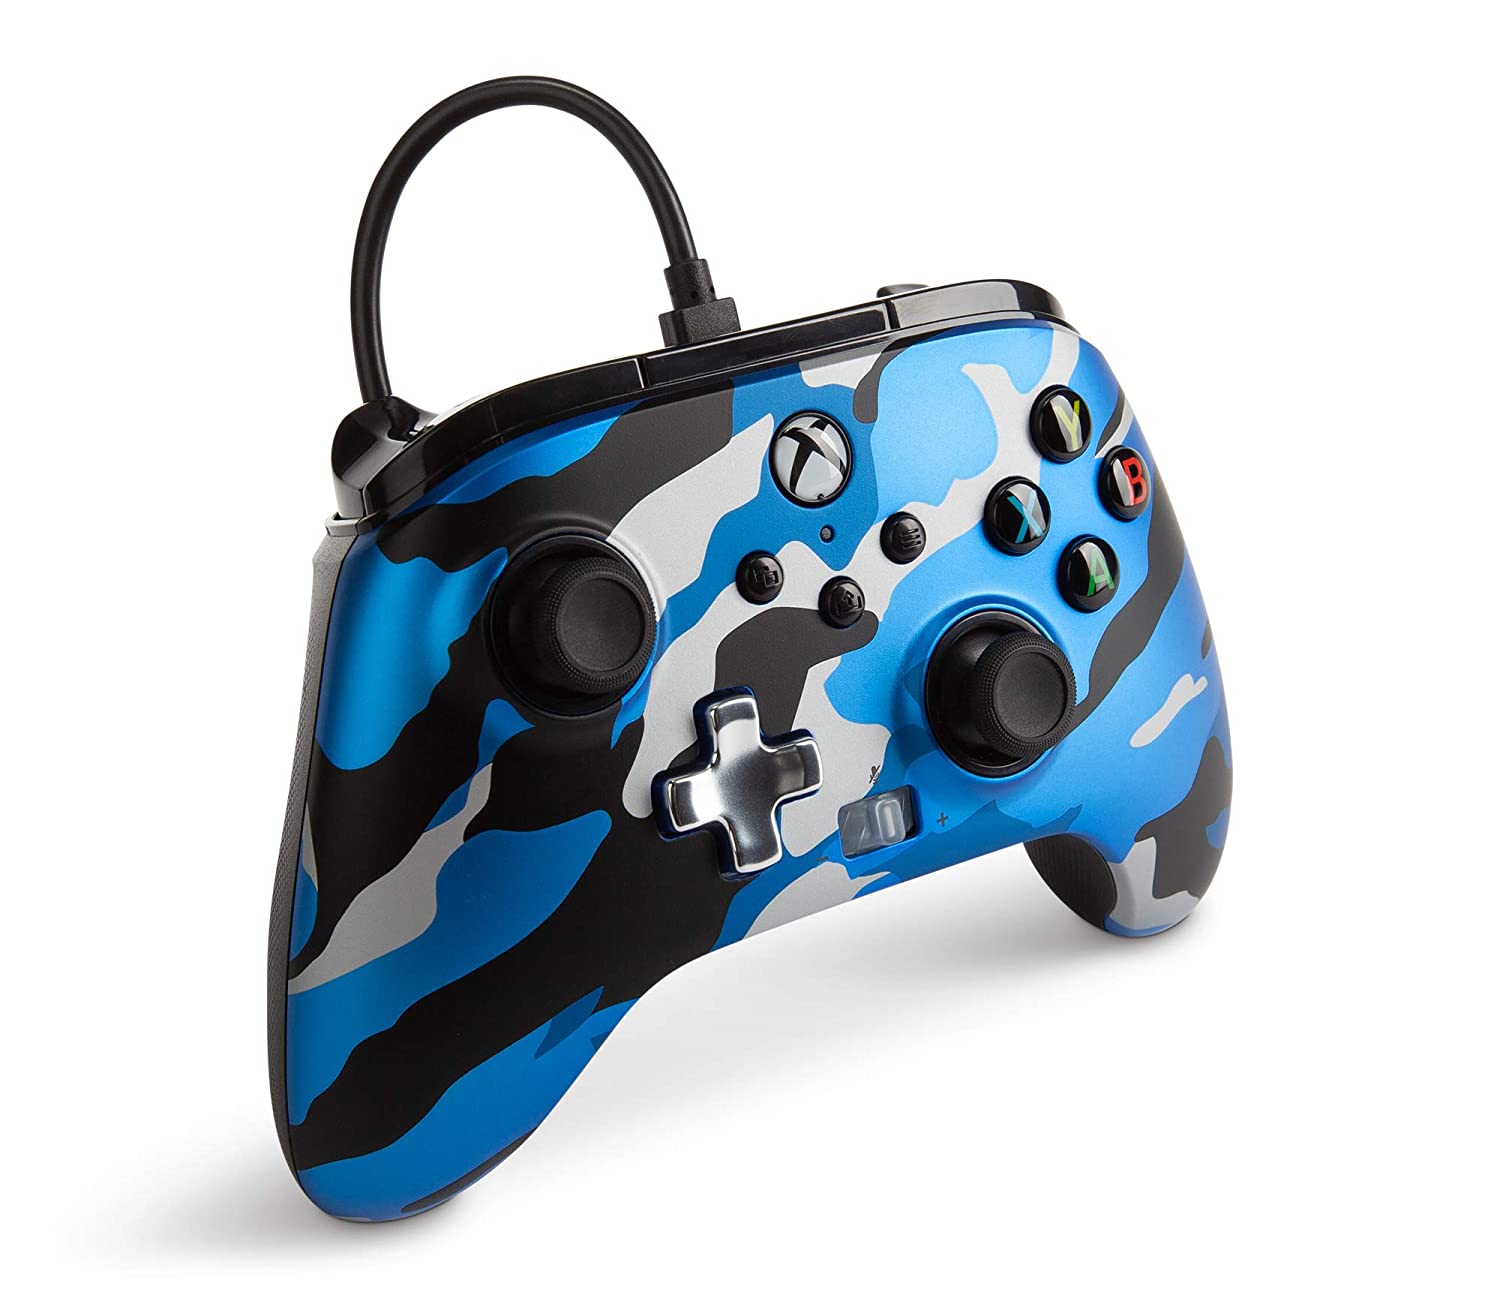 PDP Xbox Series X/S & Xbox One Wired Controller - Blue Camo